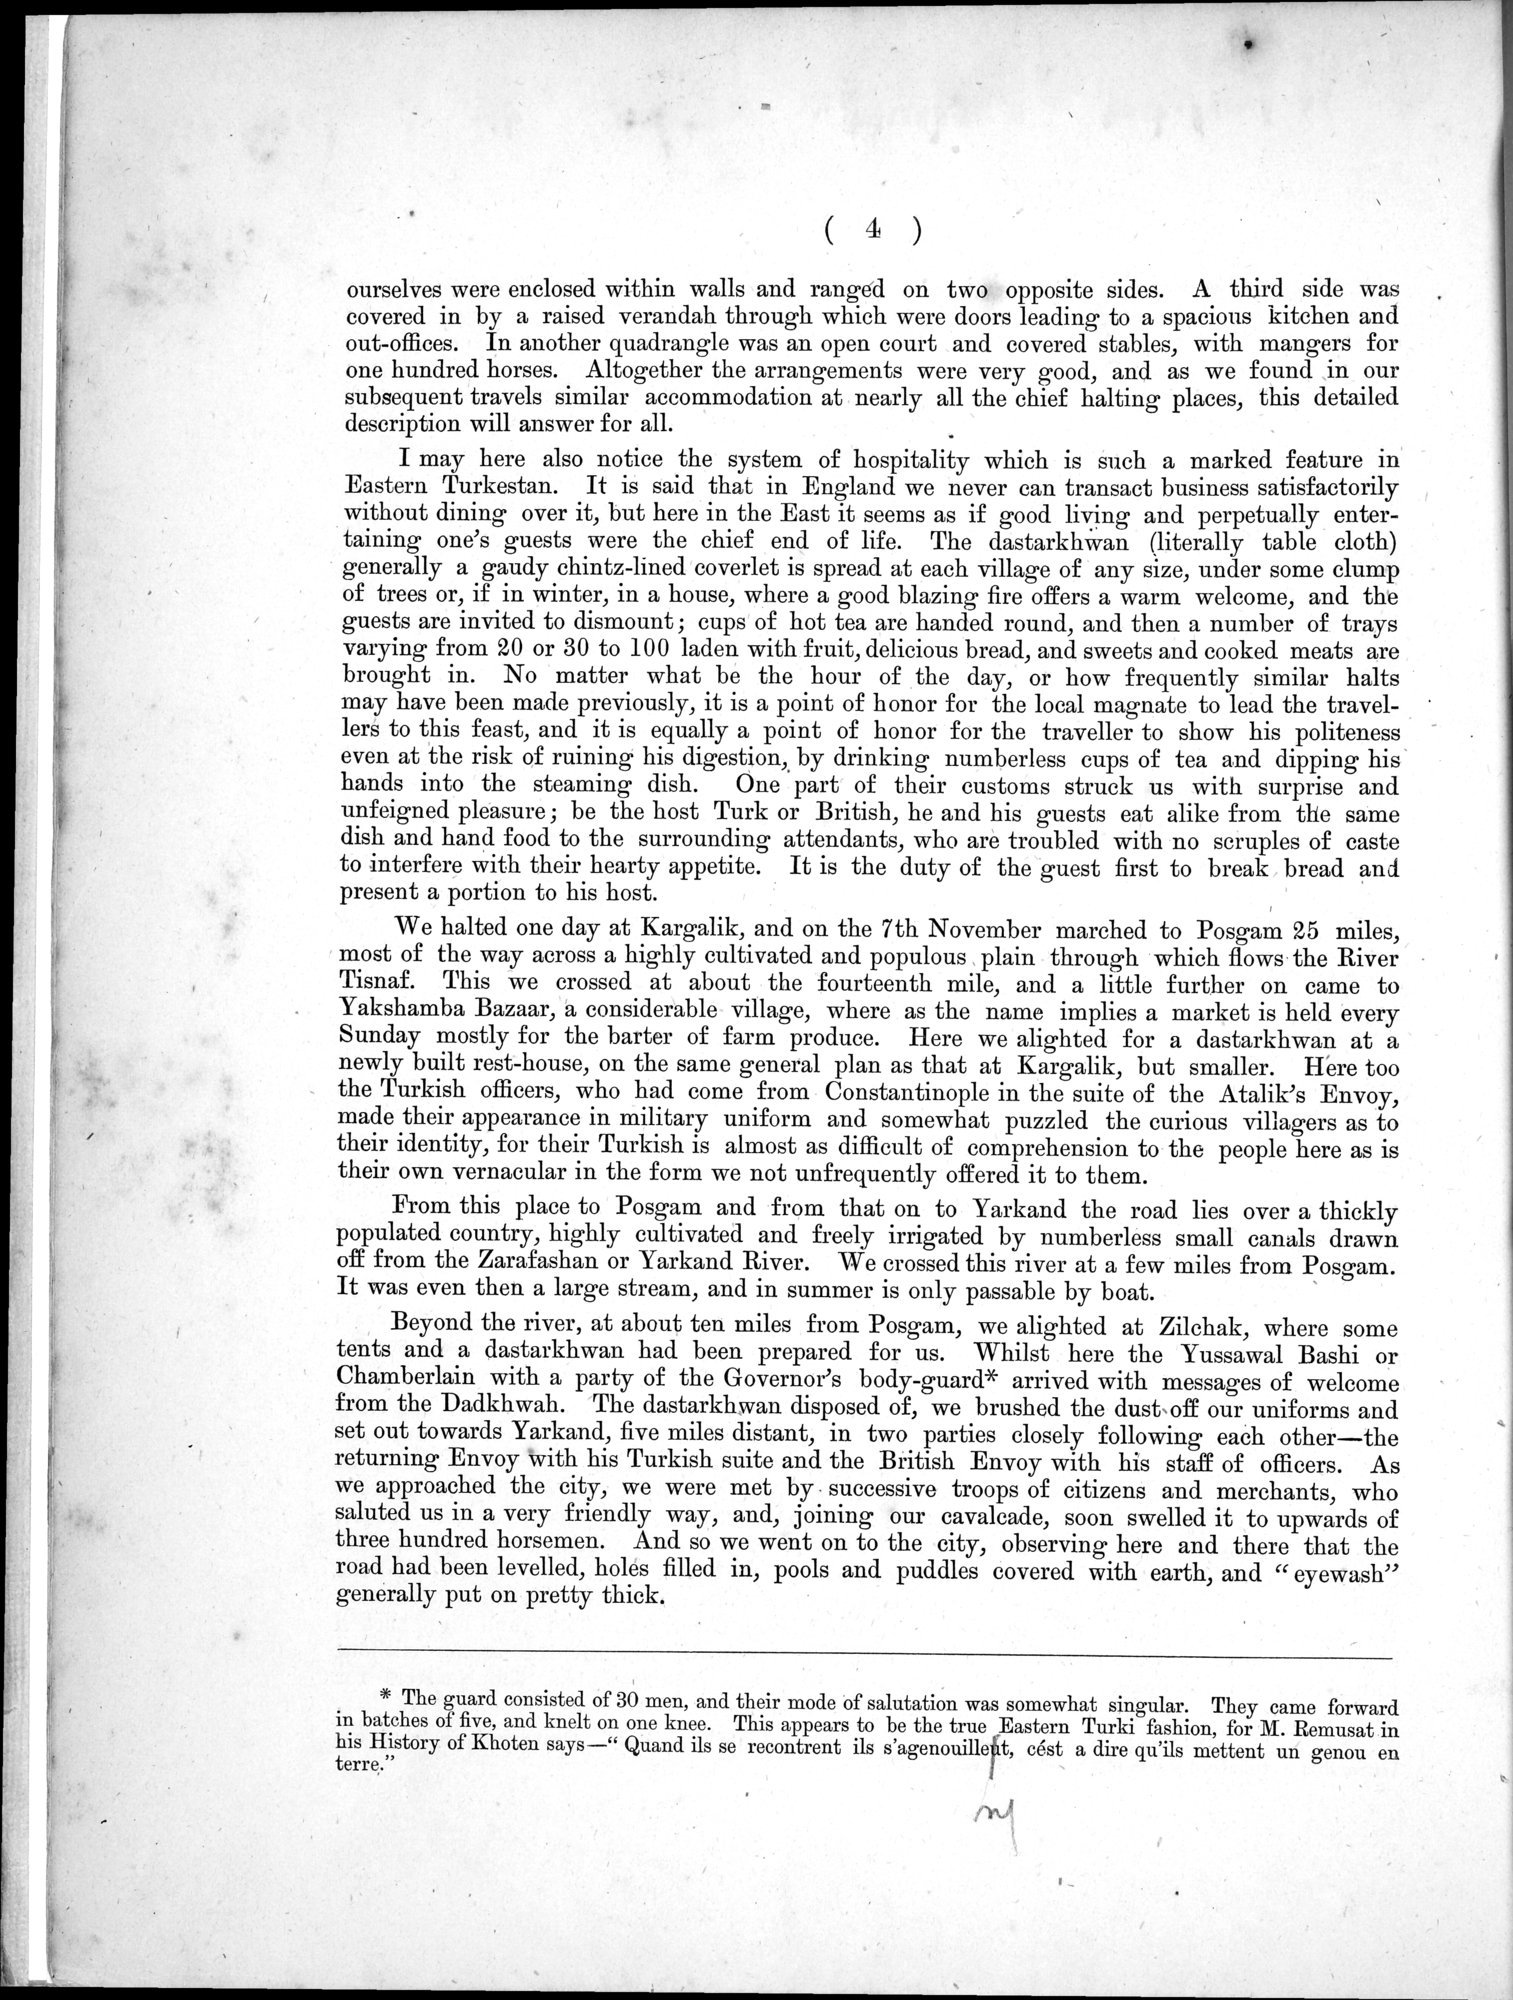 Report of a Mission to Yarkund in 1873 : vol.1 / Page 24 (Grayscale High Resolution Image)